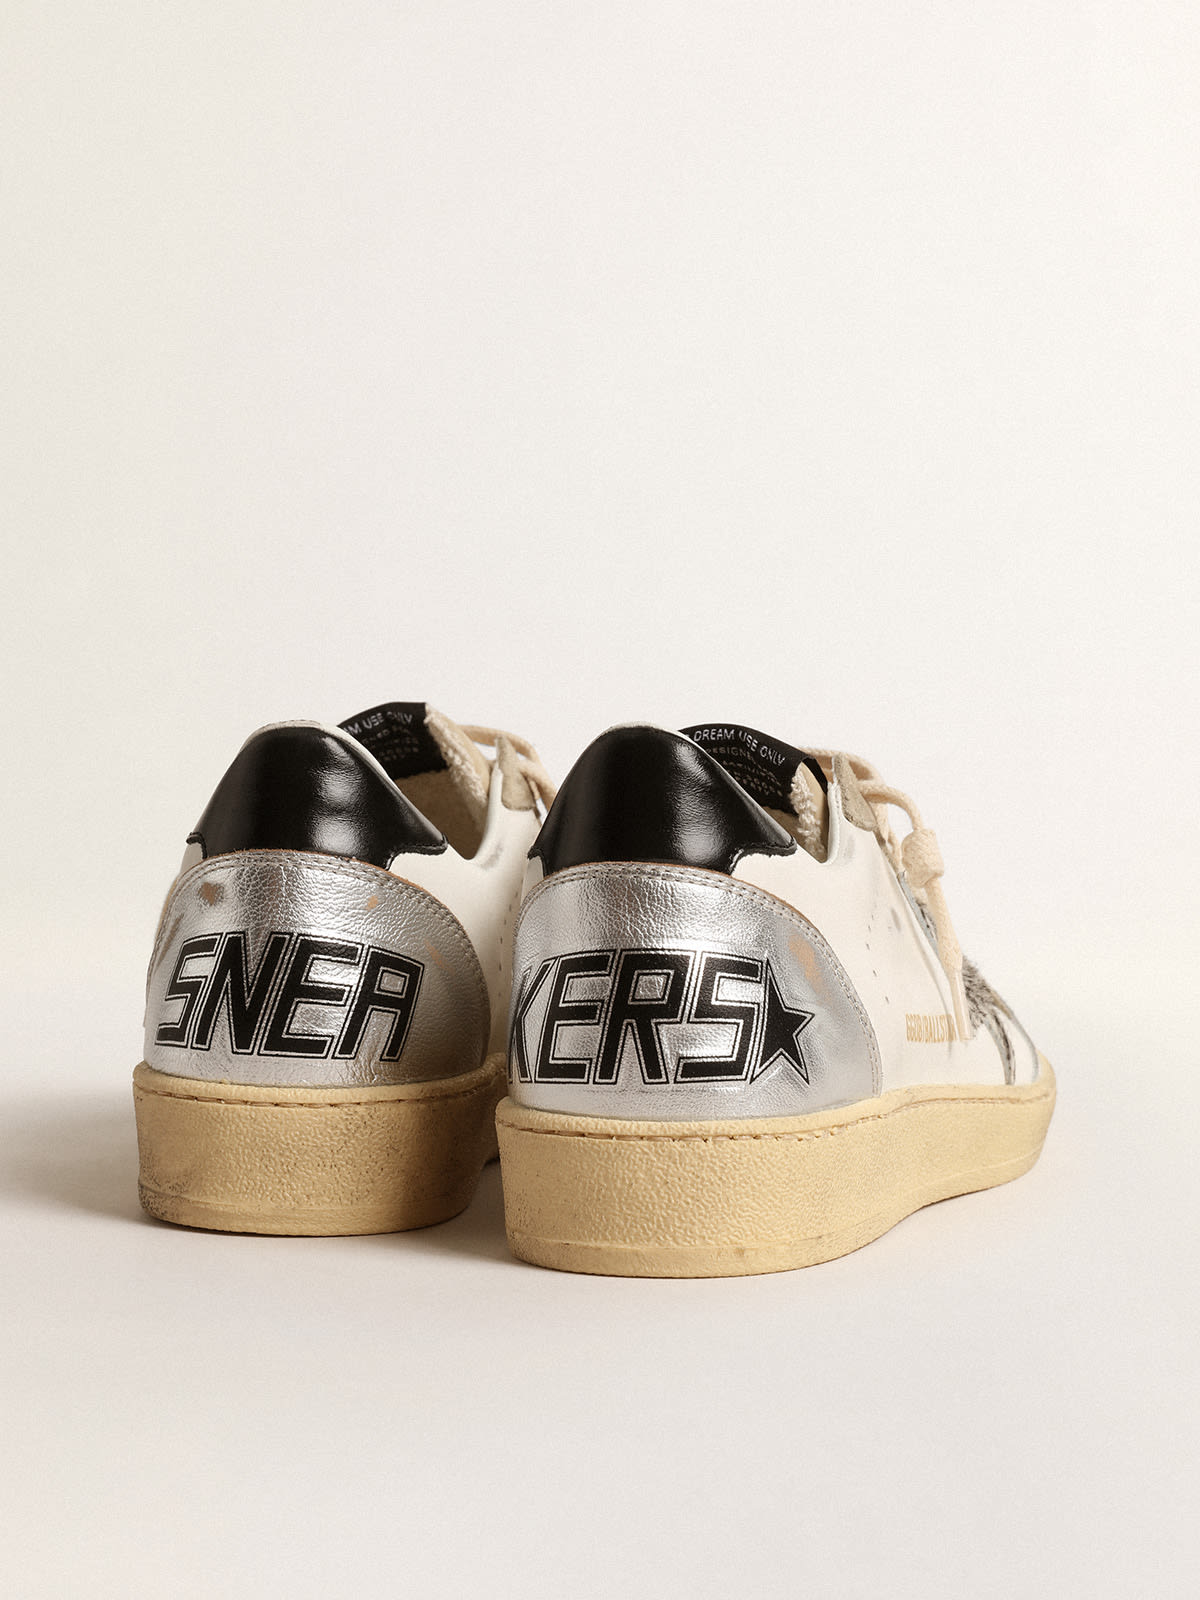 Golden Goose - Ball Star LTD with zebra-print star and metallic leather insert in 